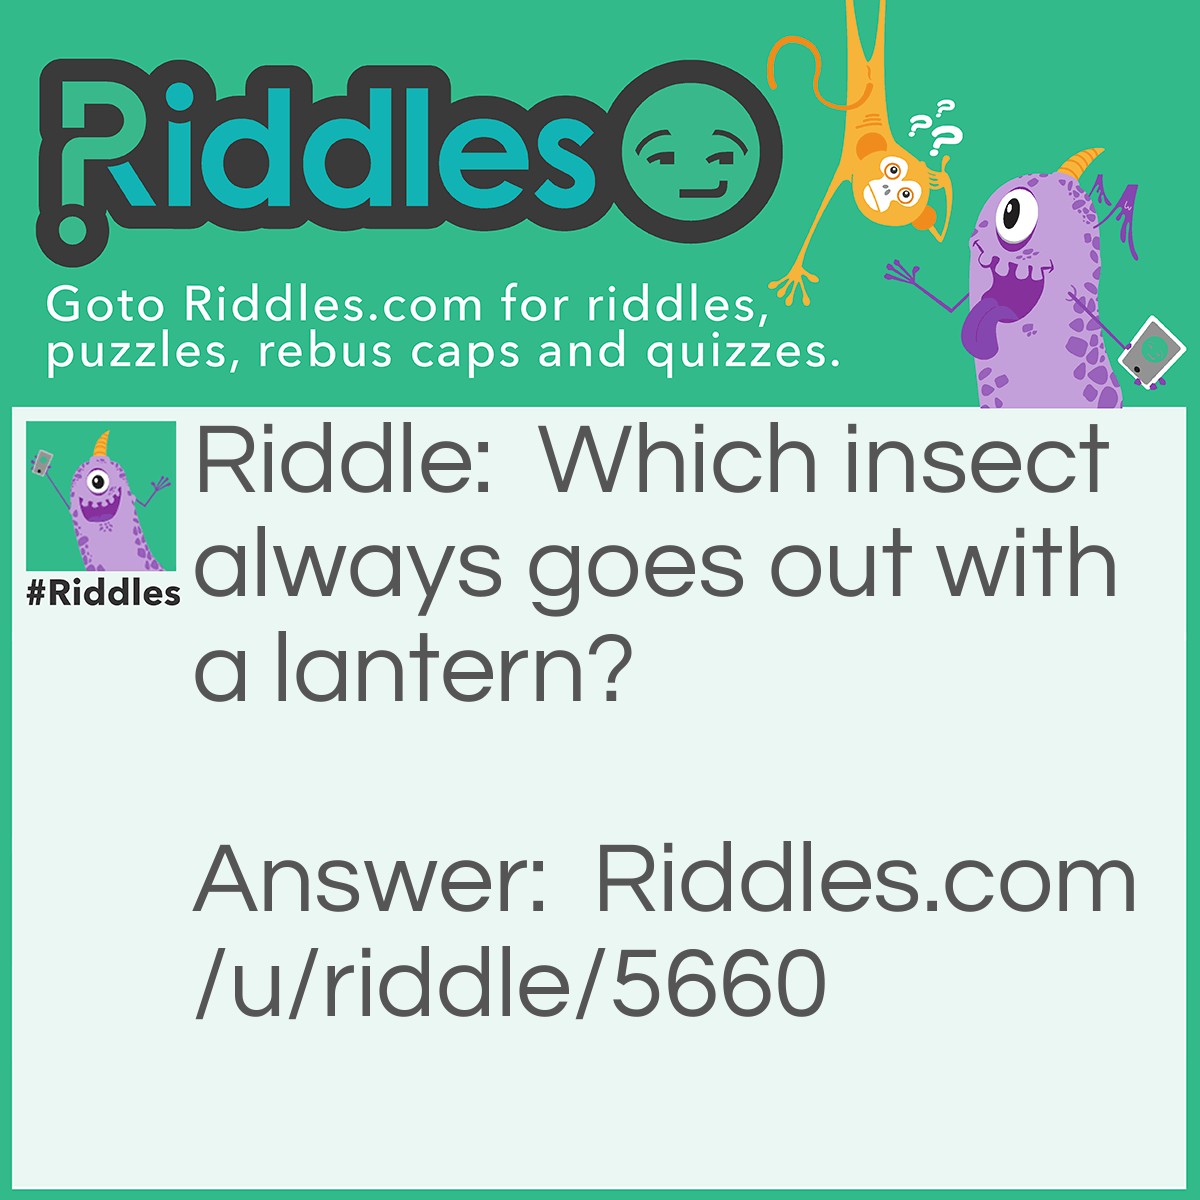 Riddle: Which insect always goes out with a lantern? Answer: The Lantern fly.